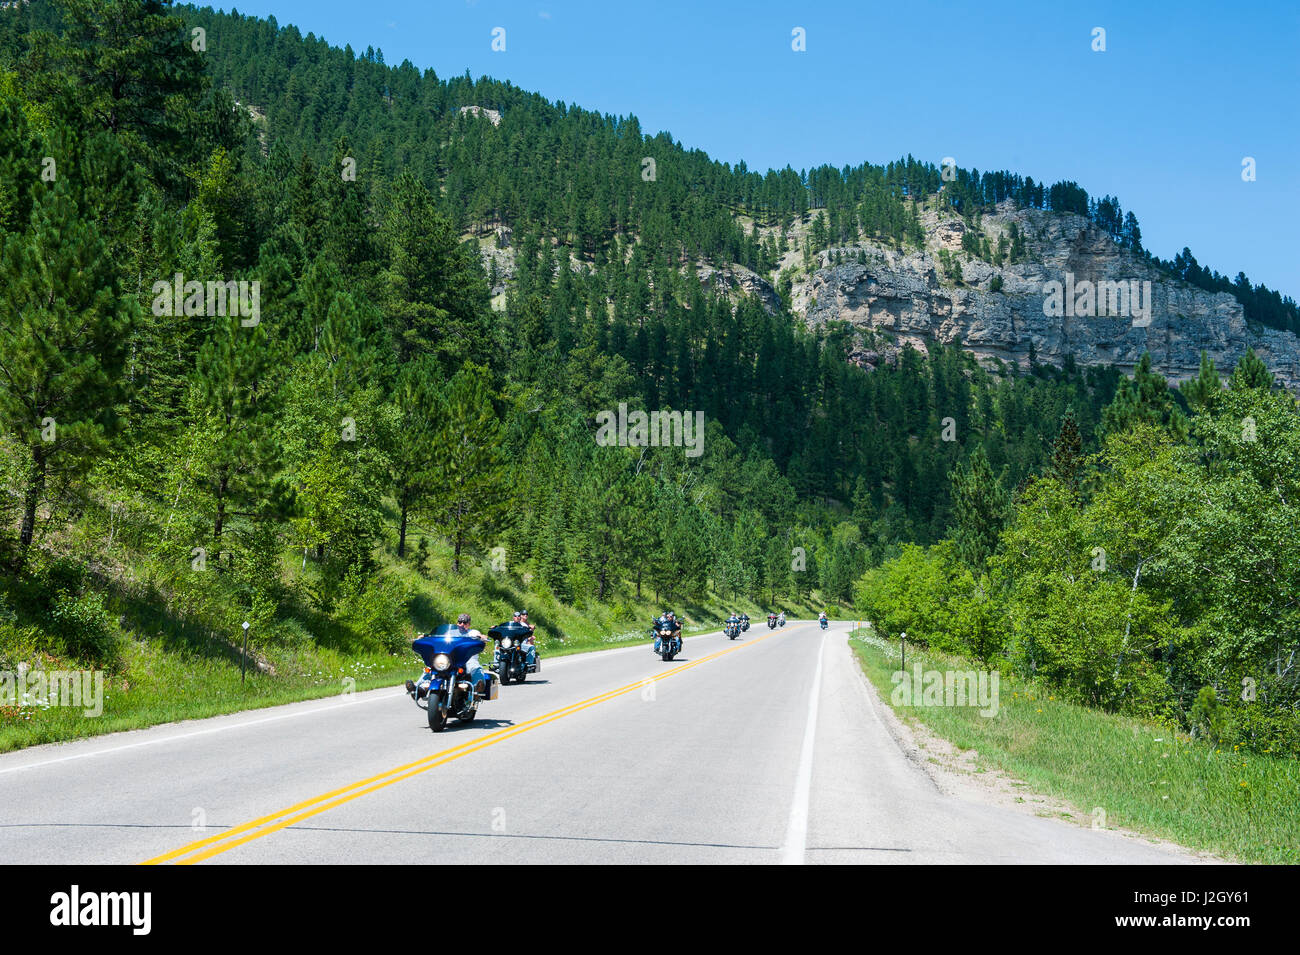 Motorcyclist from the Sturges Festival driving through the Black hills, South Dakota, USA Stock Photo